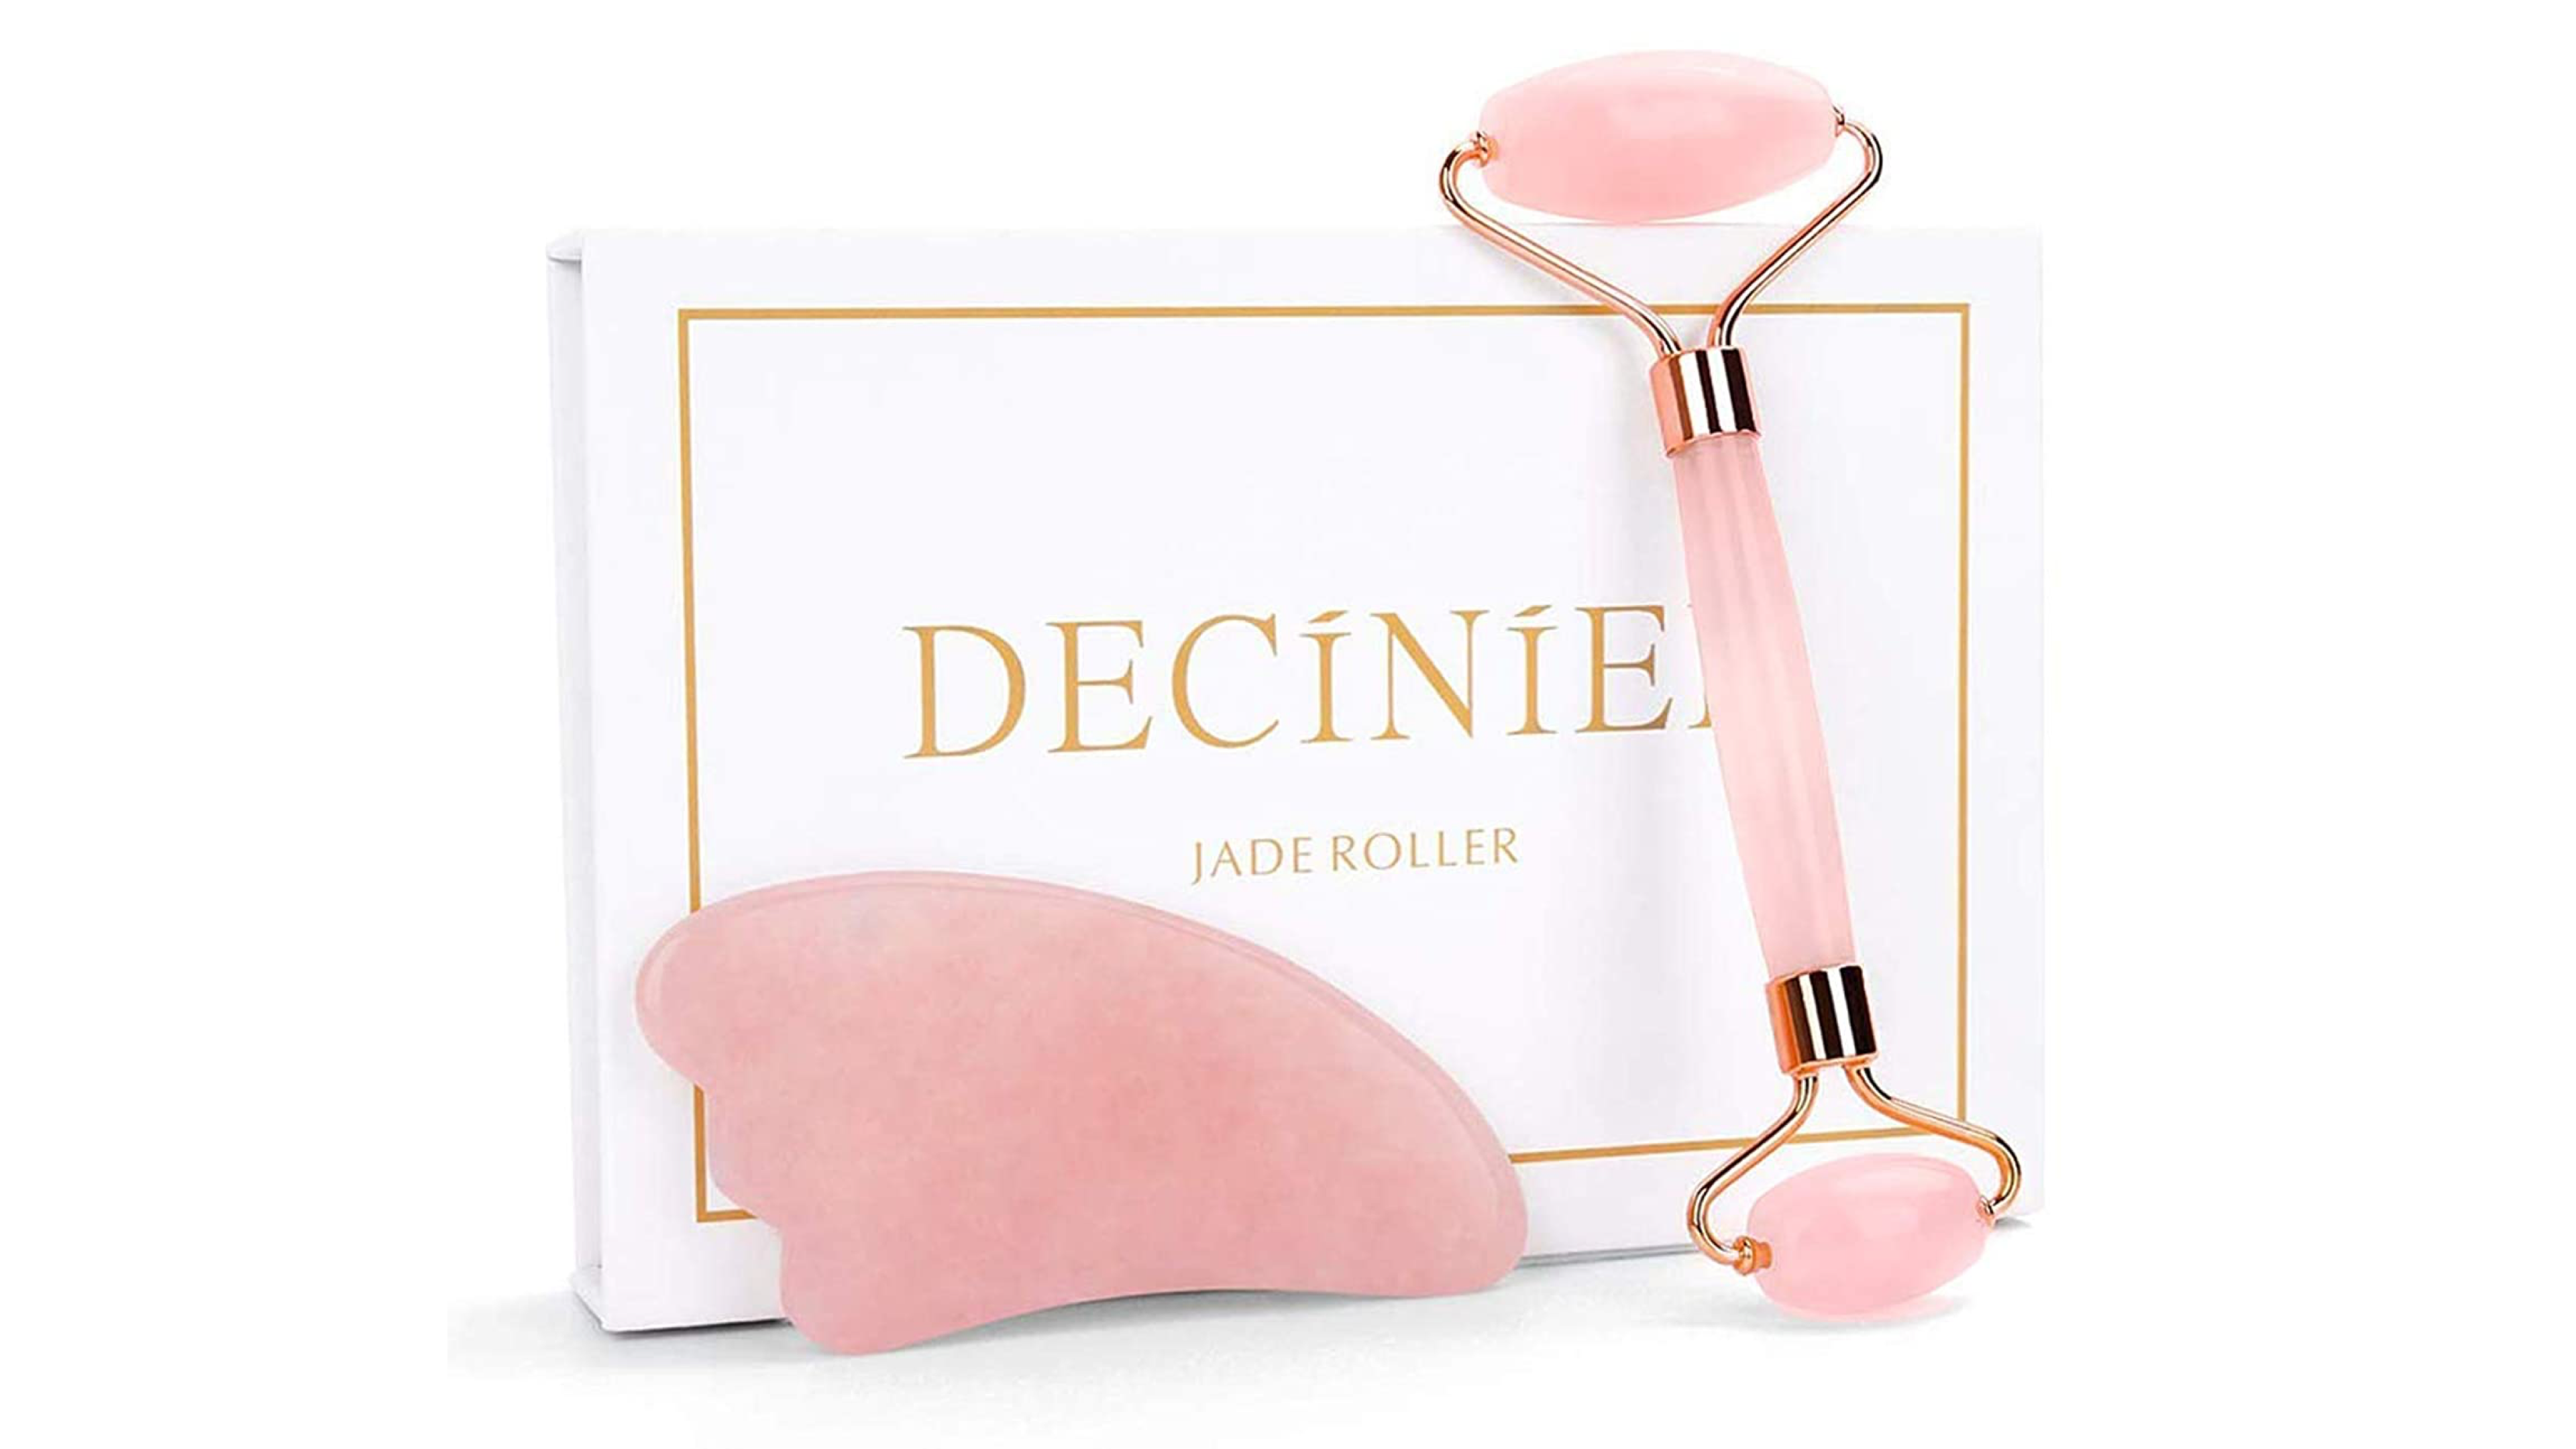 Jade Roller and Gua Sha Face Roller